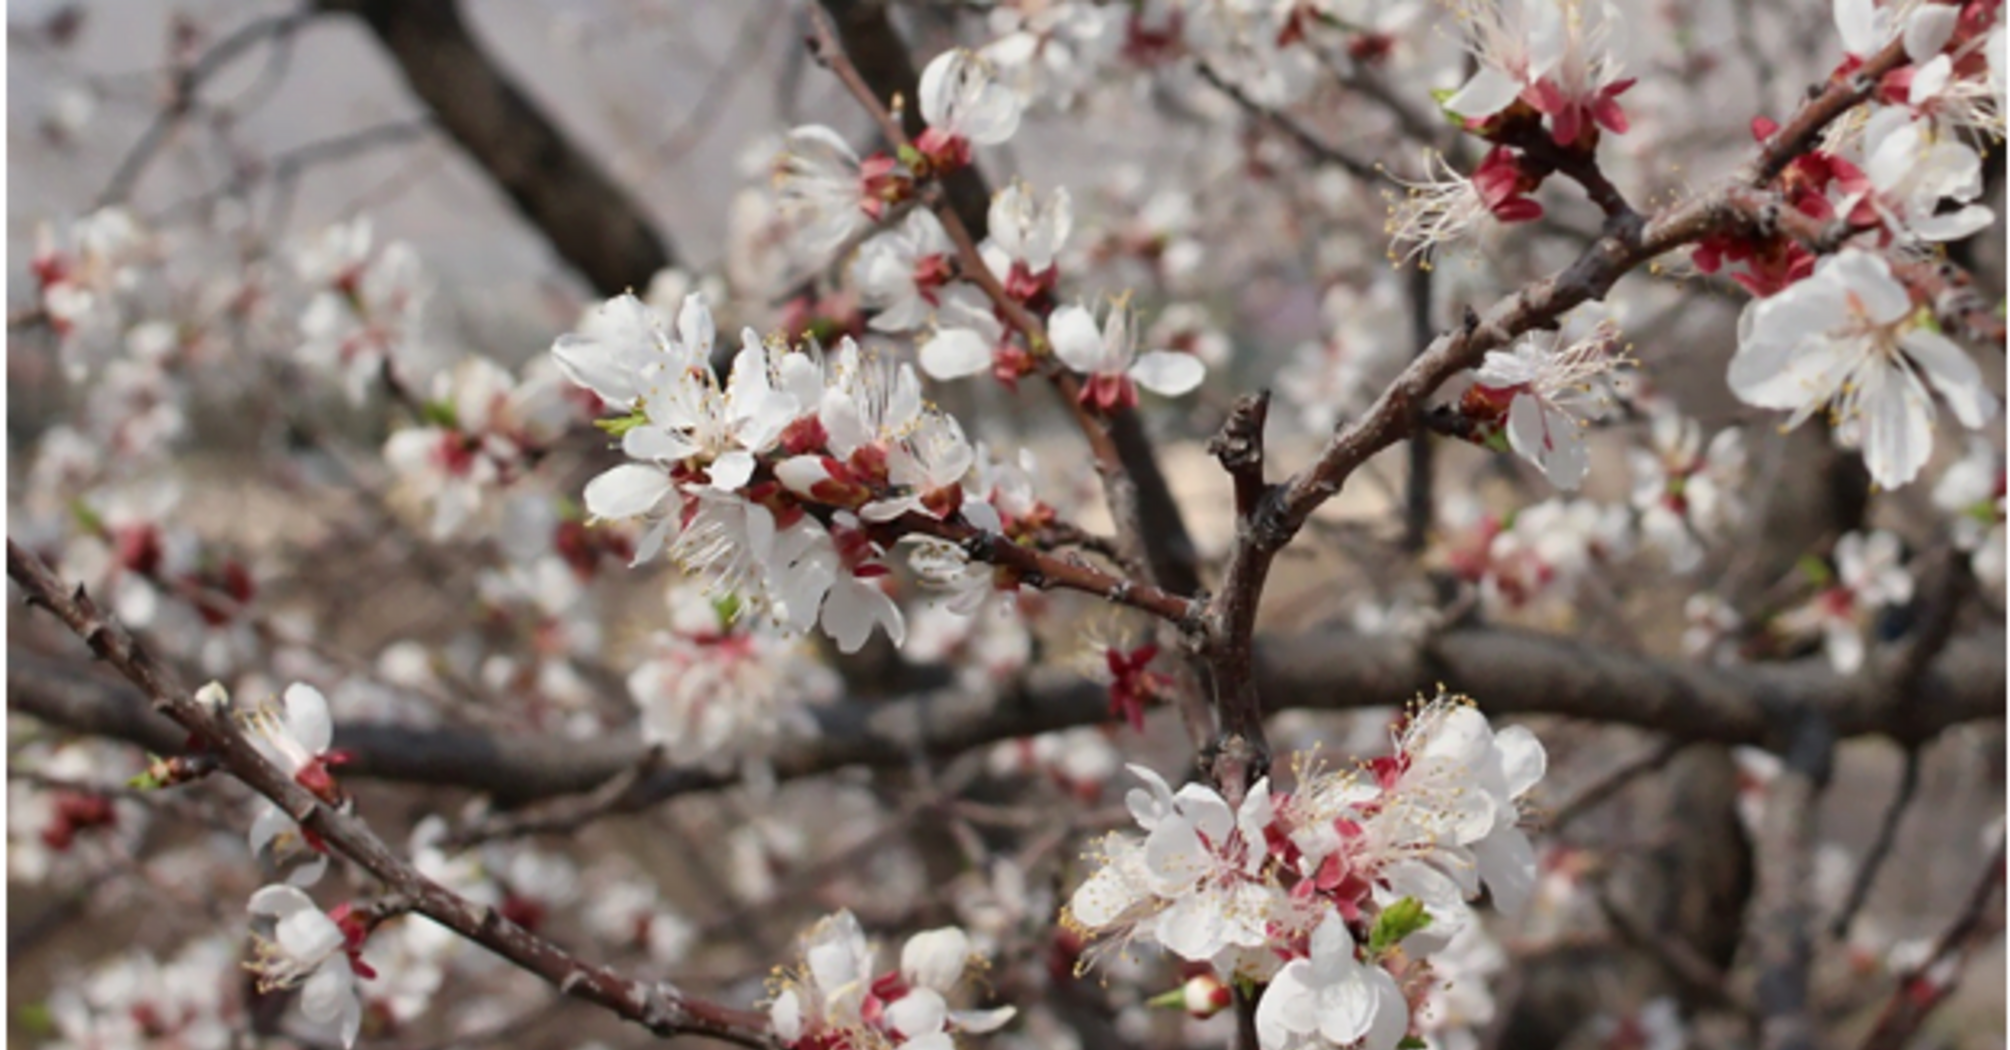 The apricot bloomed lushly and dried up